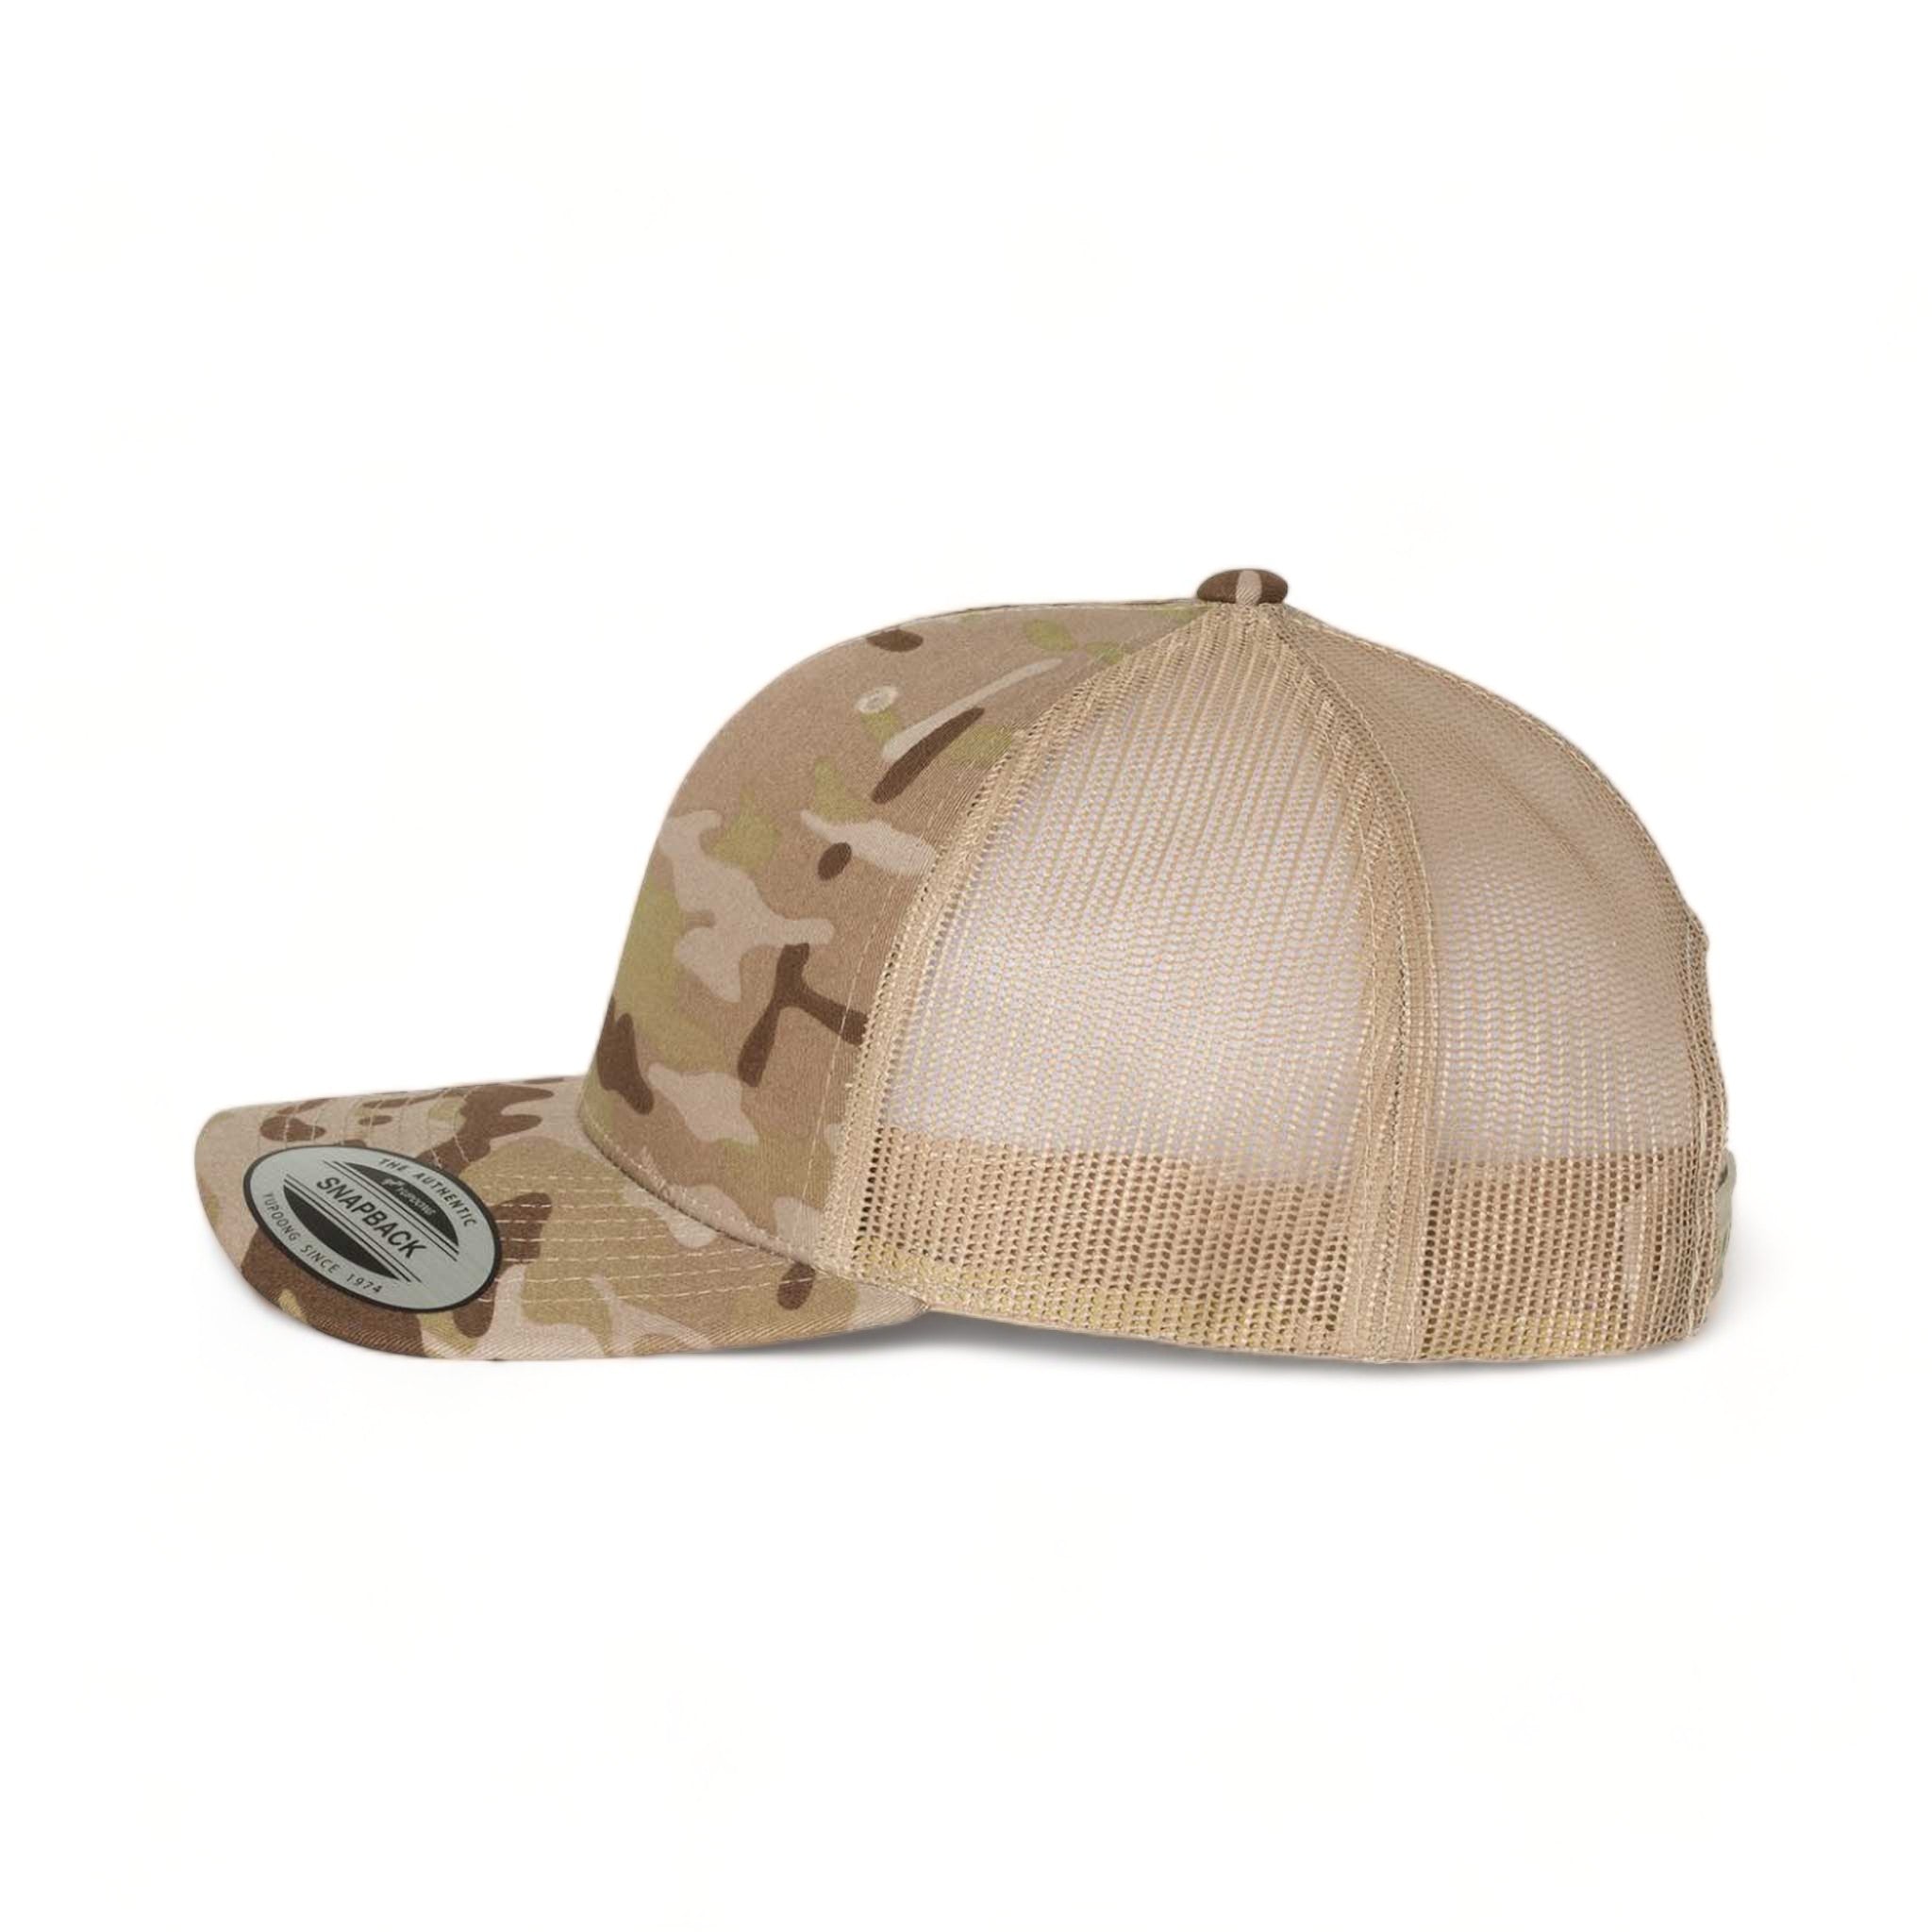 Side view of YP Classics 6606 custom hat in multicam arid and tan